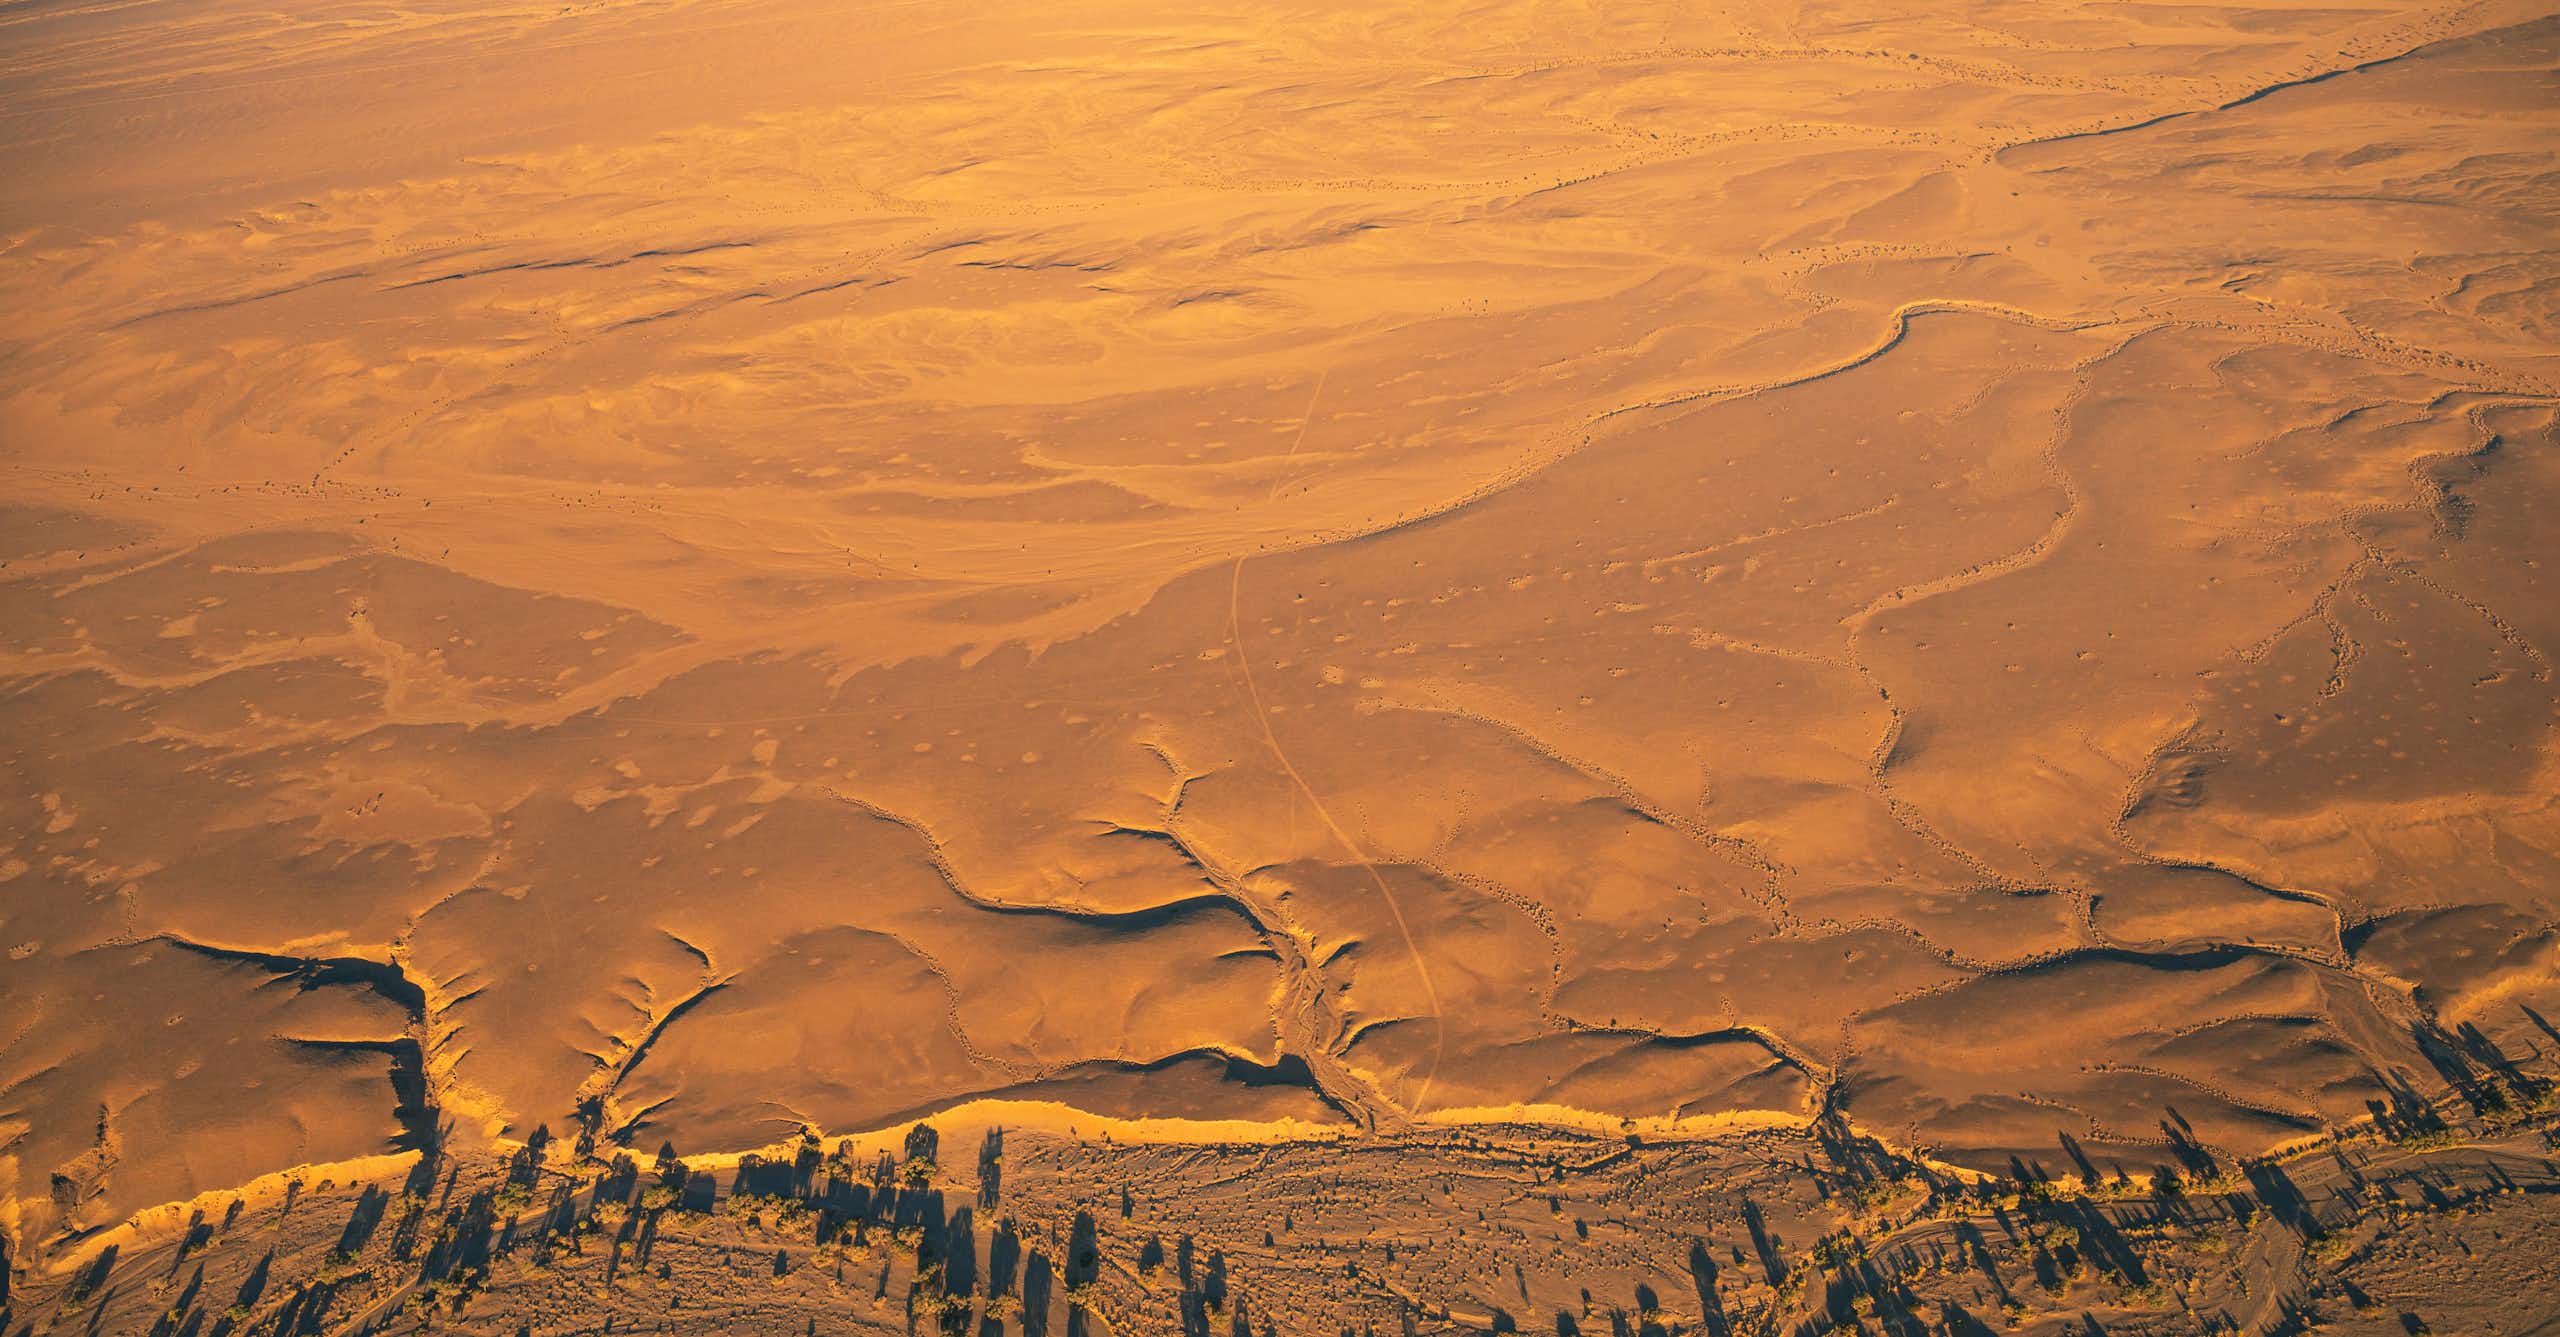 An aerial view of the Namib desert